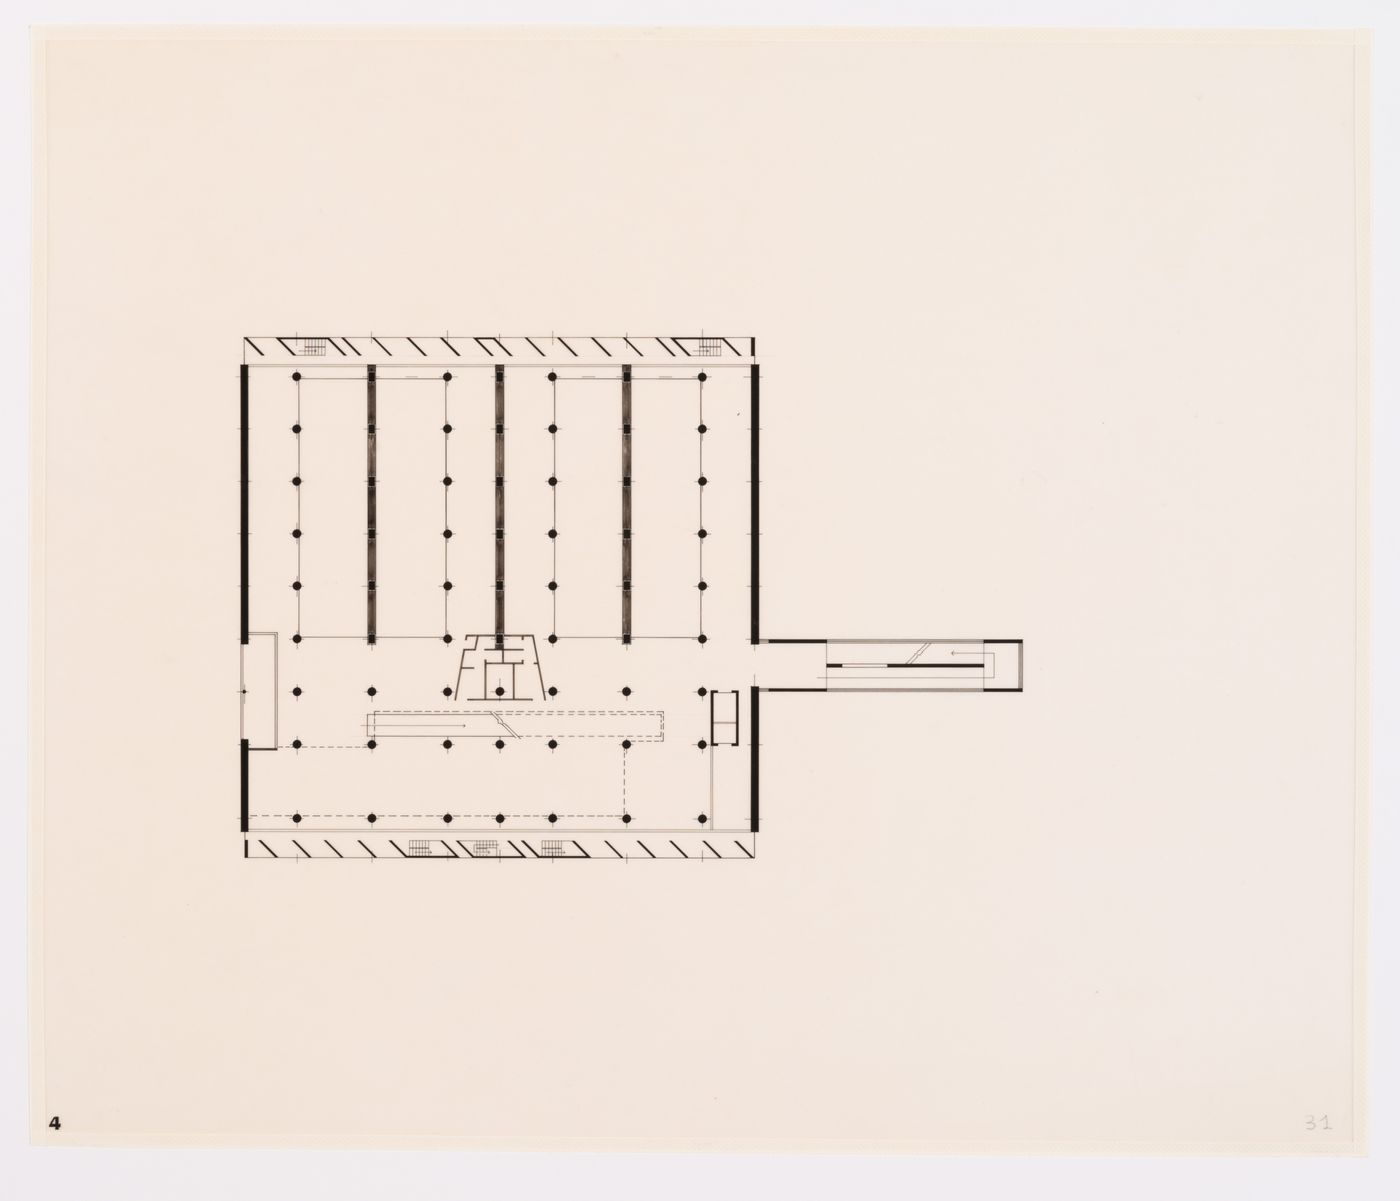 Floor plan for the Museum of Knowledge, in Sector 1, in Chandigarh, India